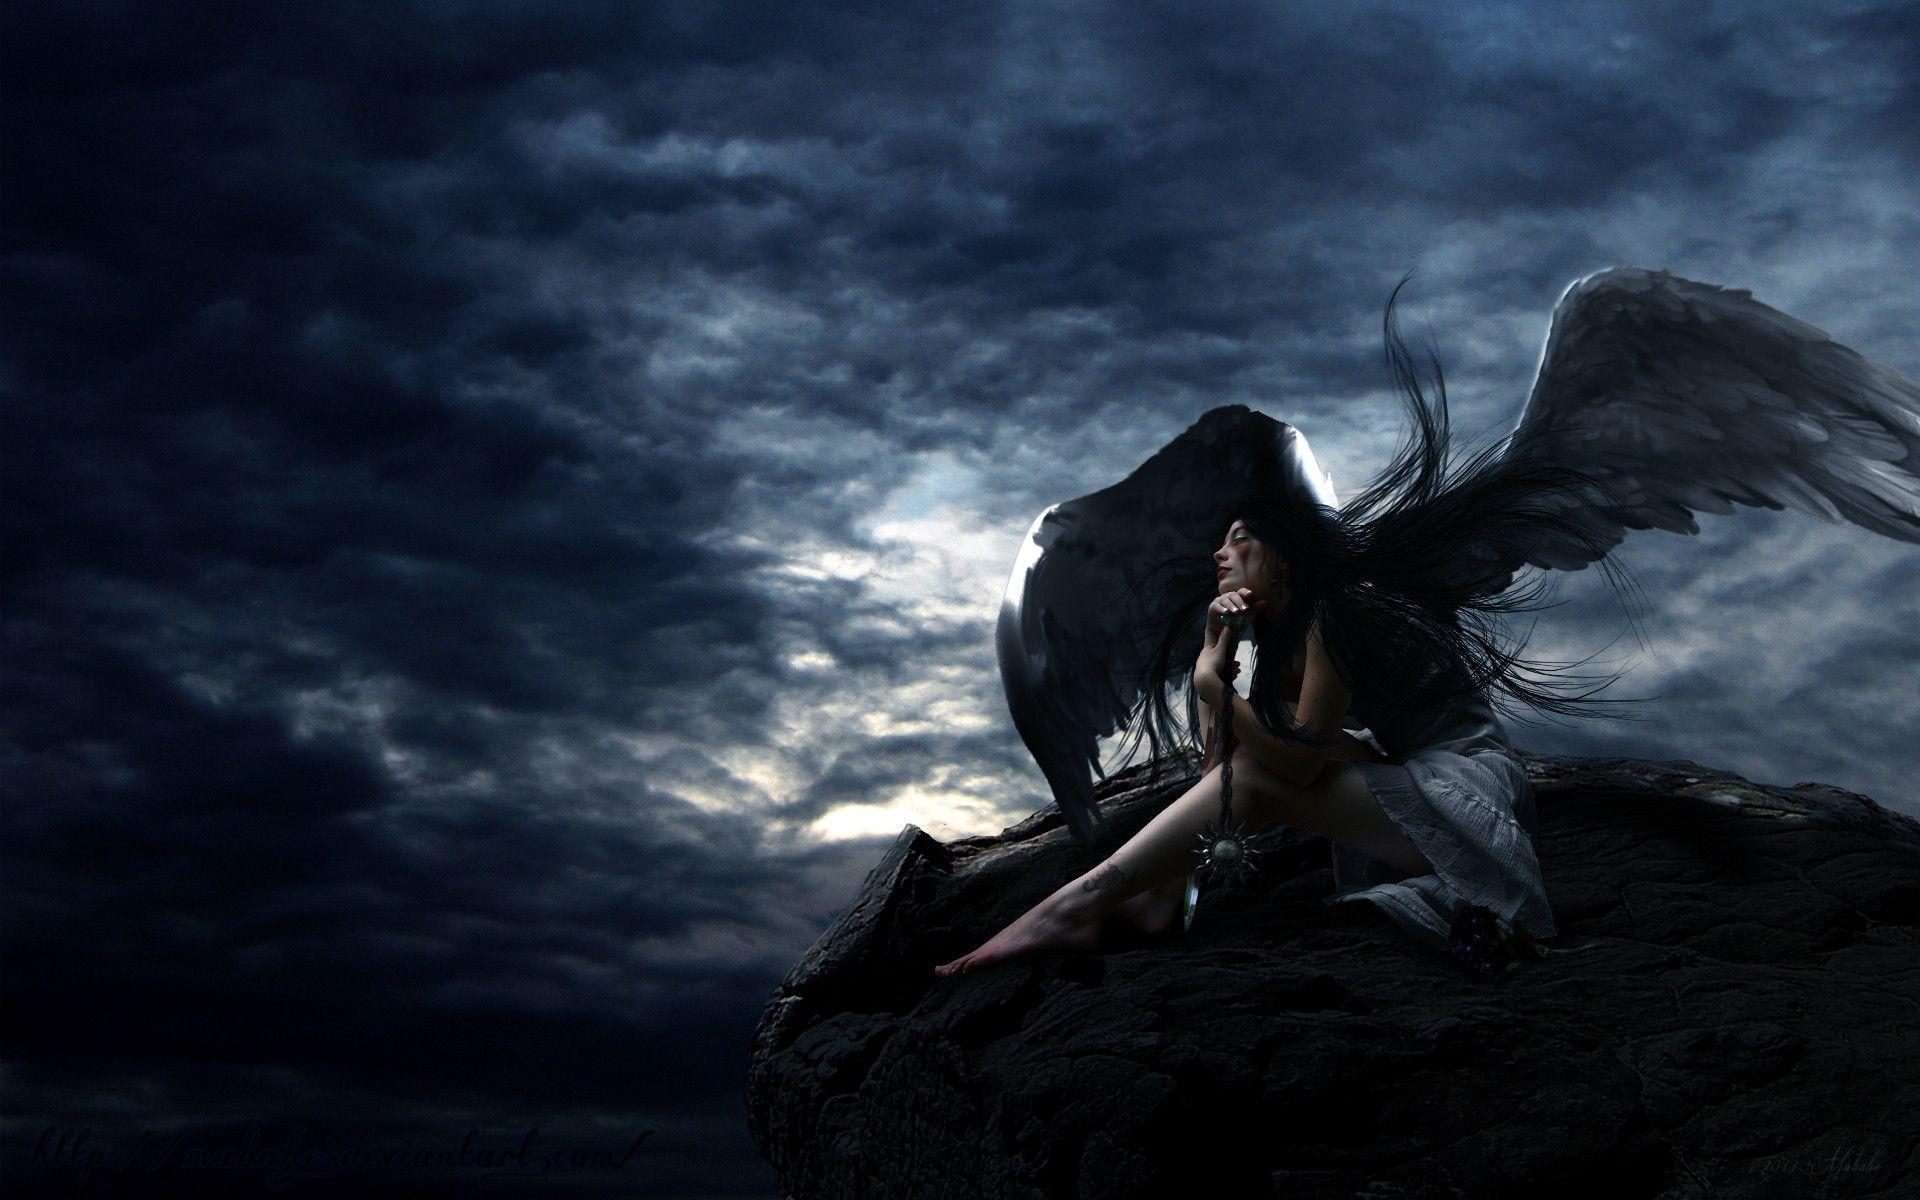 image For > Angels Wings Wallpaper